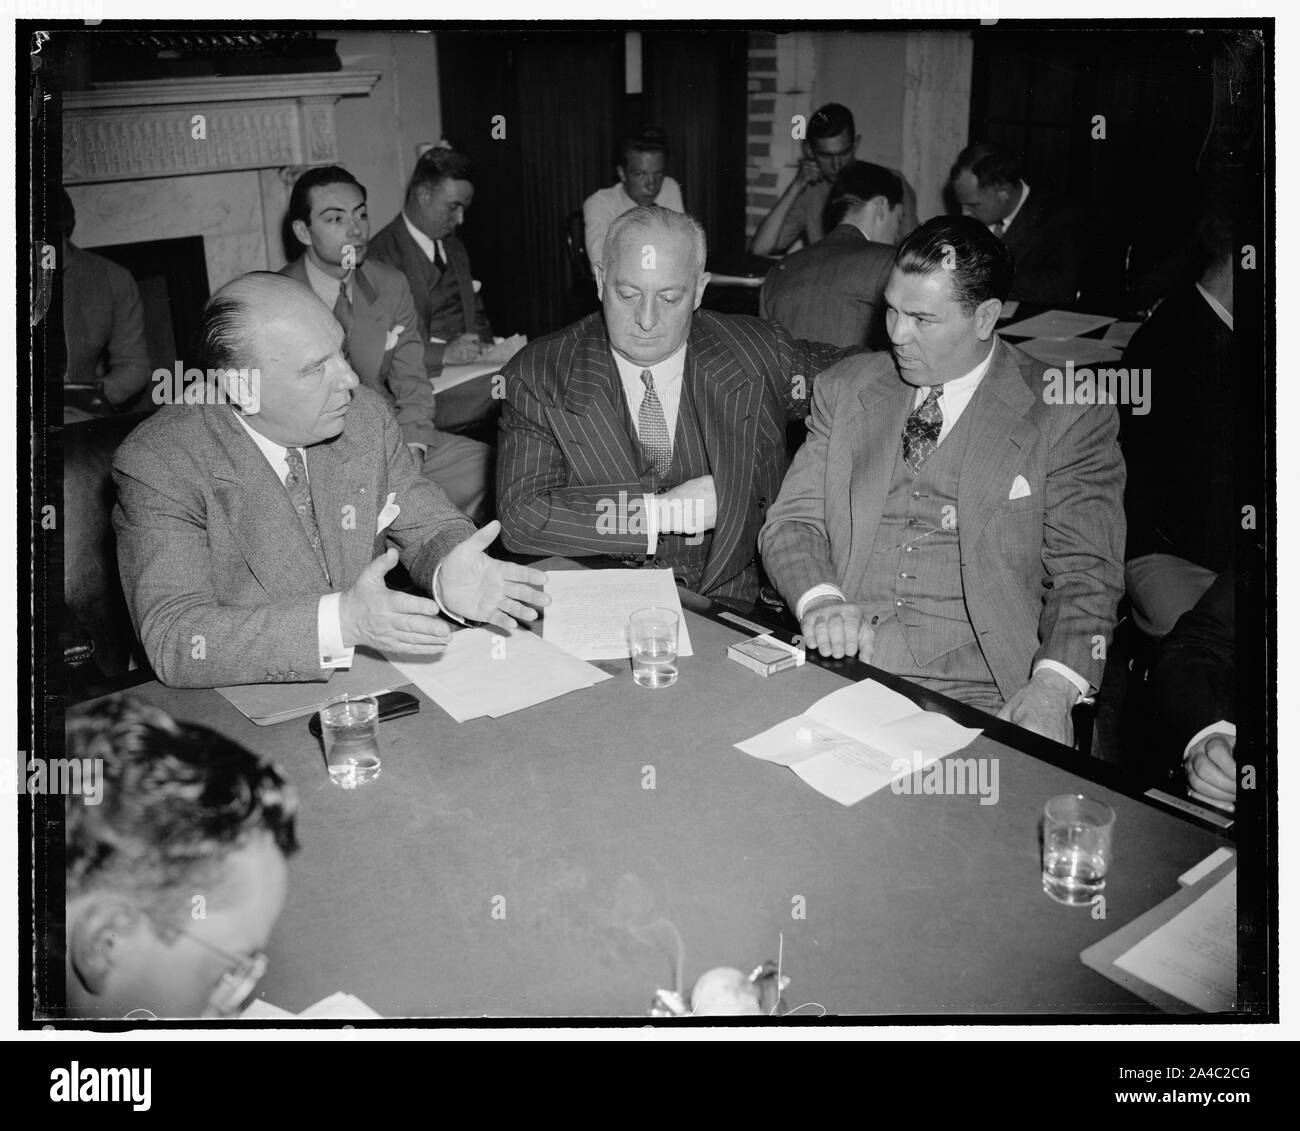 The Manassa Mauler appeals for repeal of law against shipment of eight films. Washington, D.C., May 25. Jack Dempsey, the Manassa Amuler and Col. John R. Kilpatrick, President of the Madison Square Garden Corp., were the main witnesses before a Senate Interstate Commerce Subcommittee today which is holding hearings upon a bill proposed by former amateur heavyweight champion Sen. W. Warren Barbour which would lift the present ban upon prize eight films in interstate commerce. Left to right: Senator Ernest L. Undeen, Chairman, Col. Kilpatrick, Jack Dempsey Stock Photo